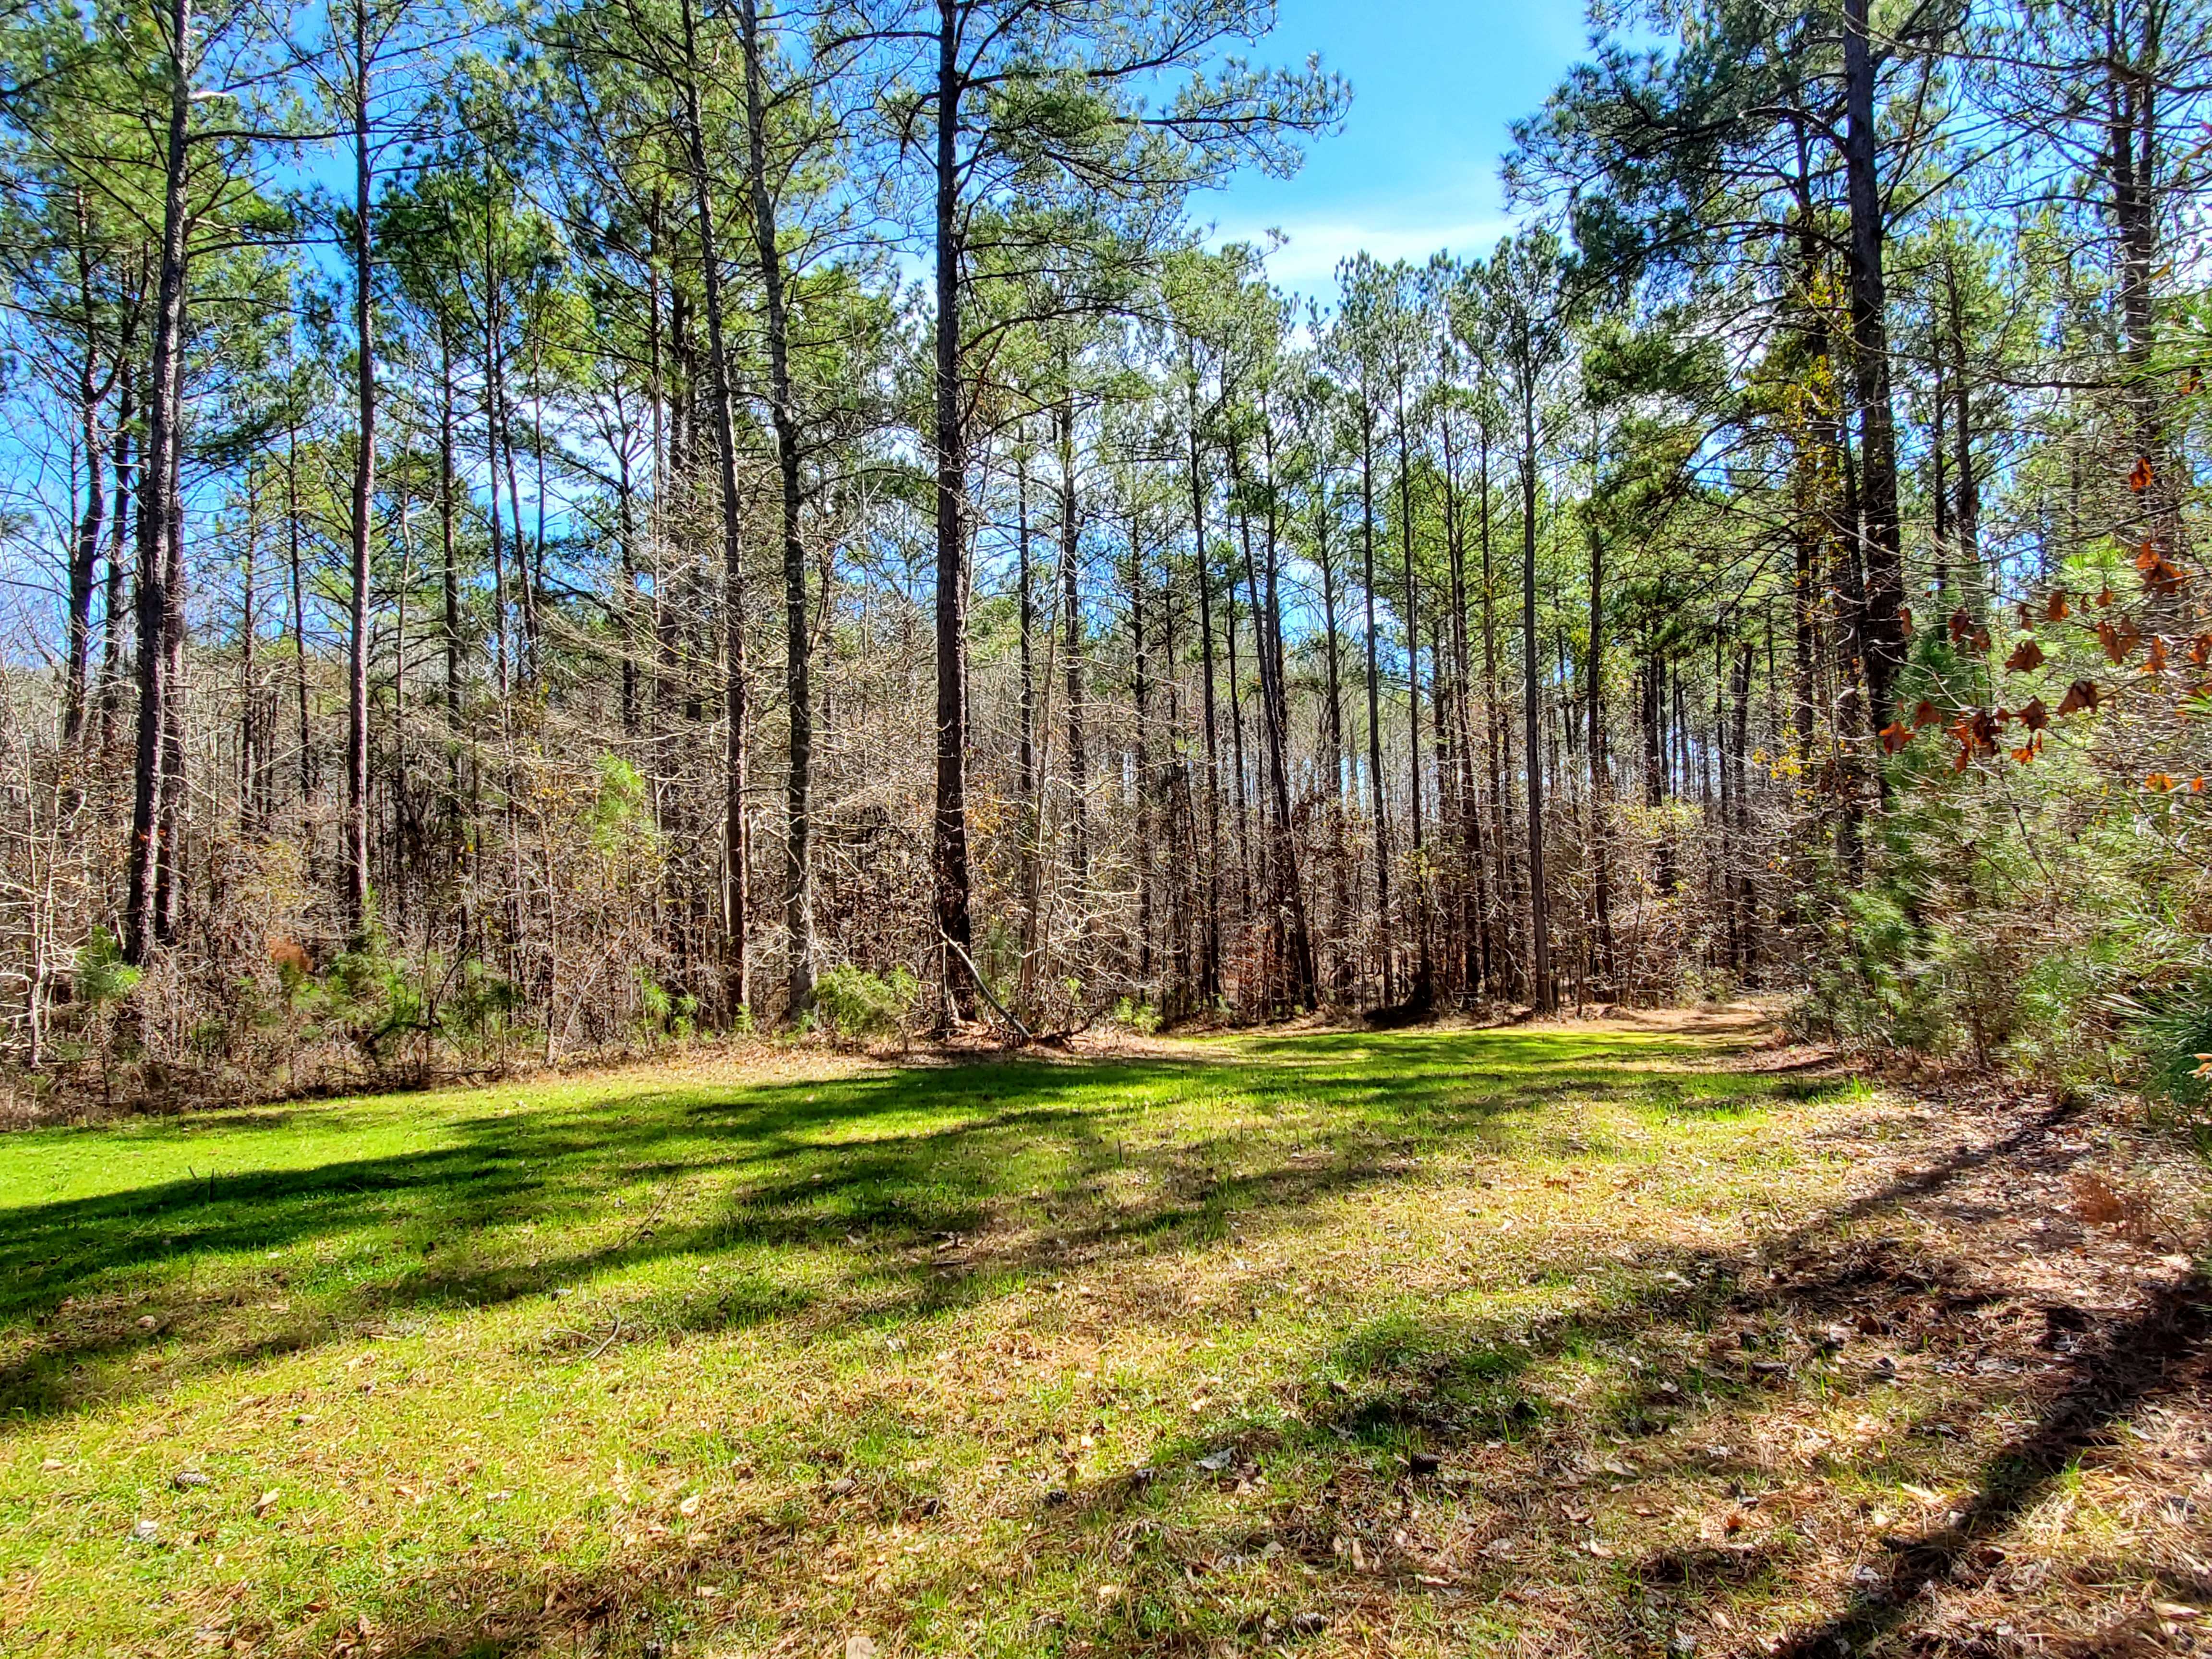 Grassy Food Plot surrounded by planted Longleaf